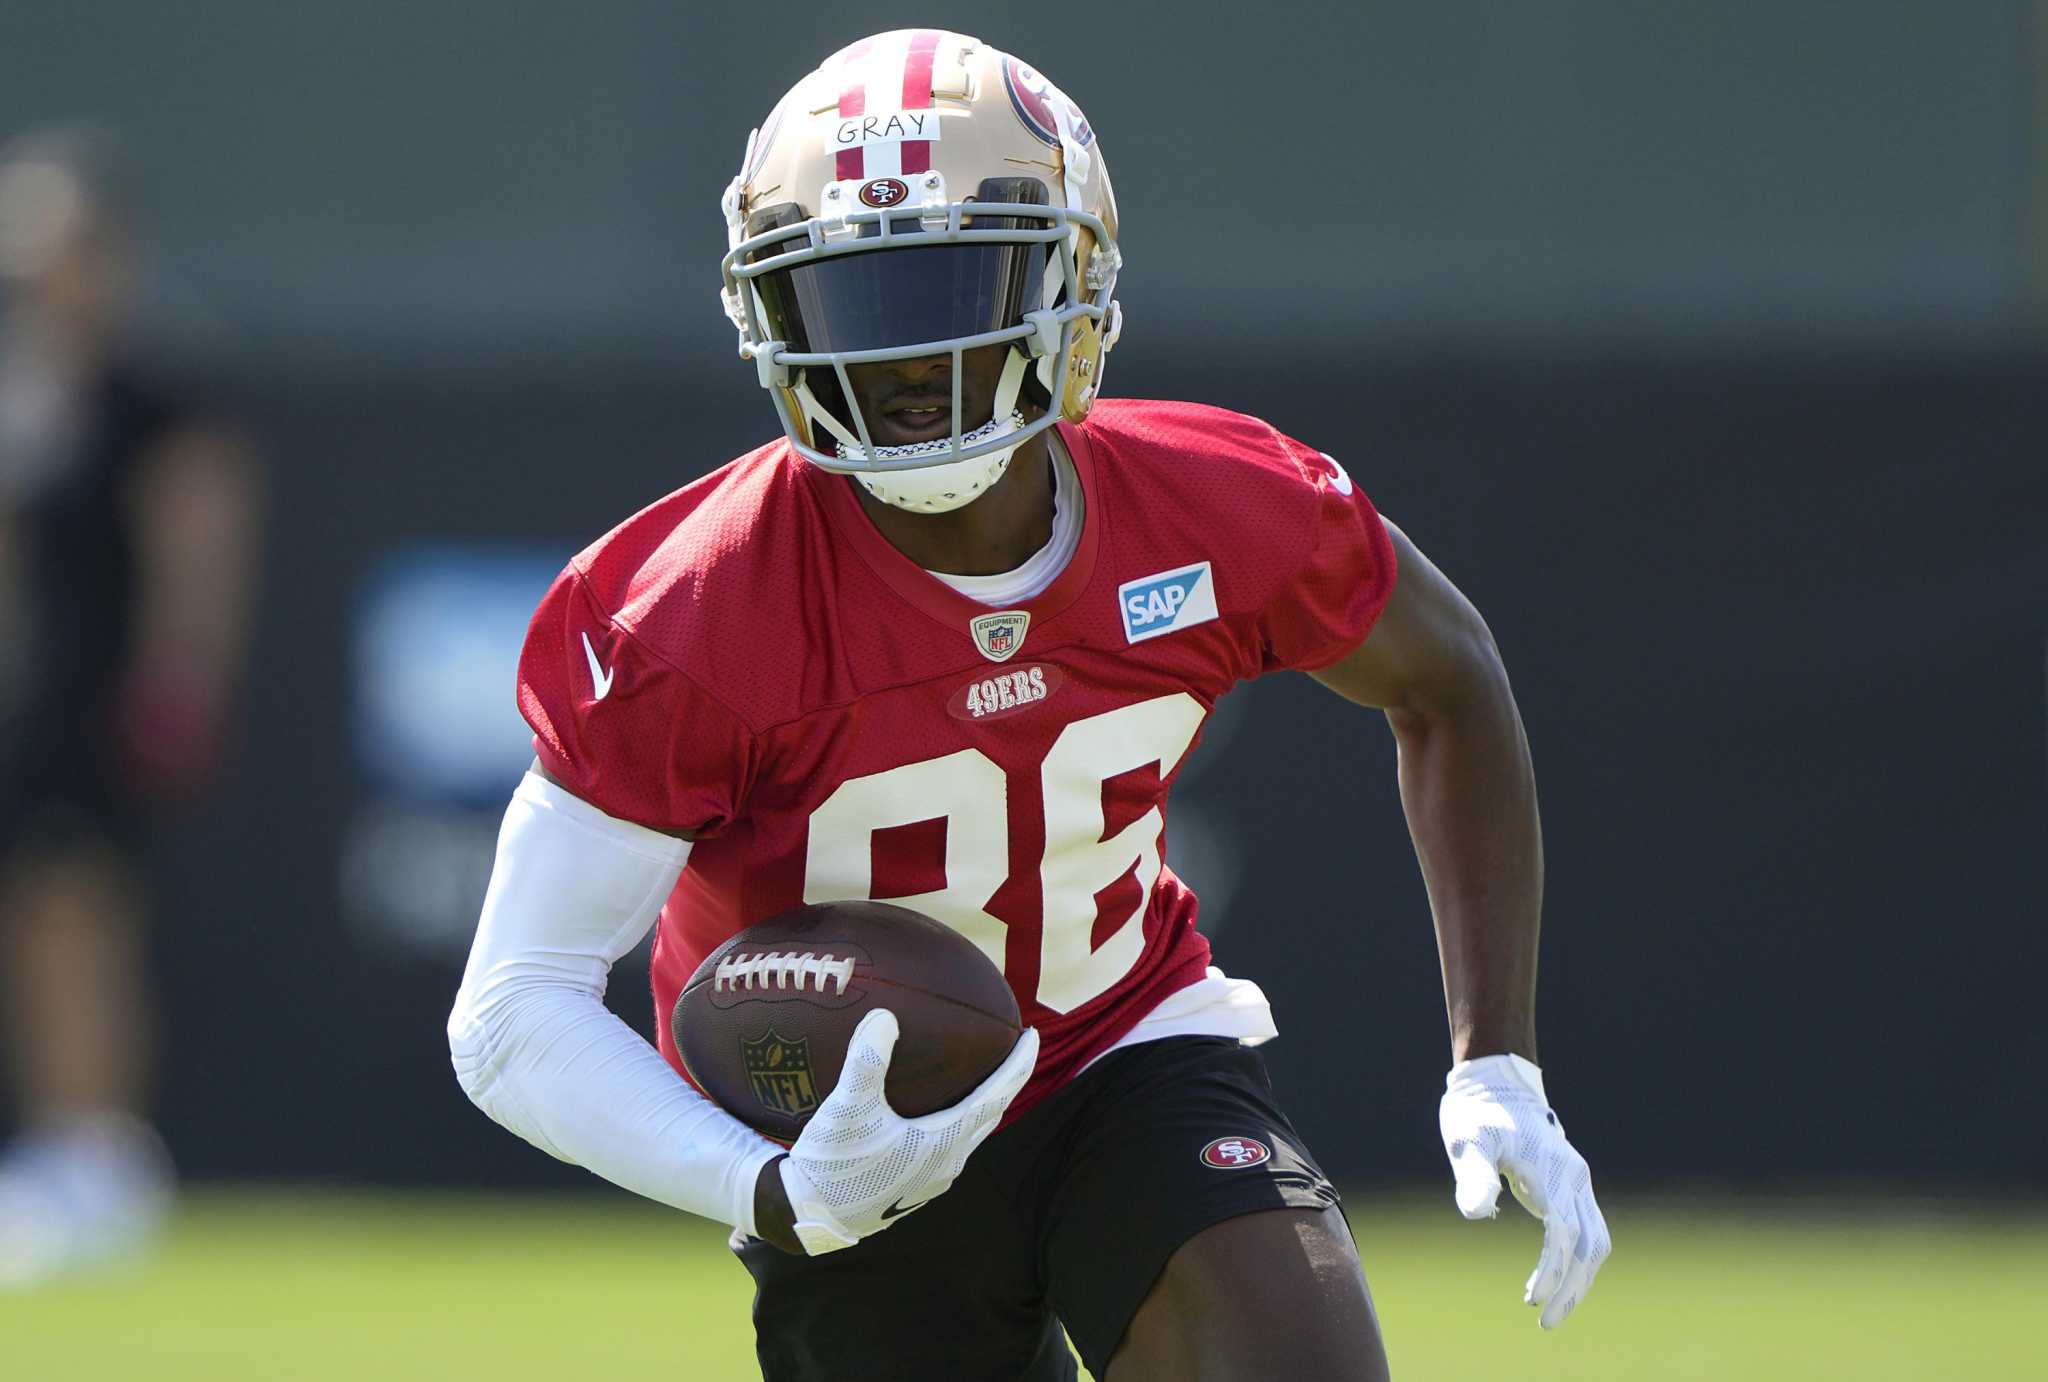 49ers' rookie Danny Gray has another up-and-down day at practice